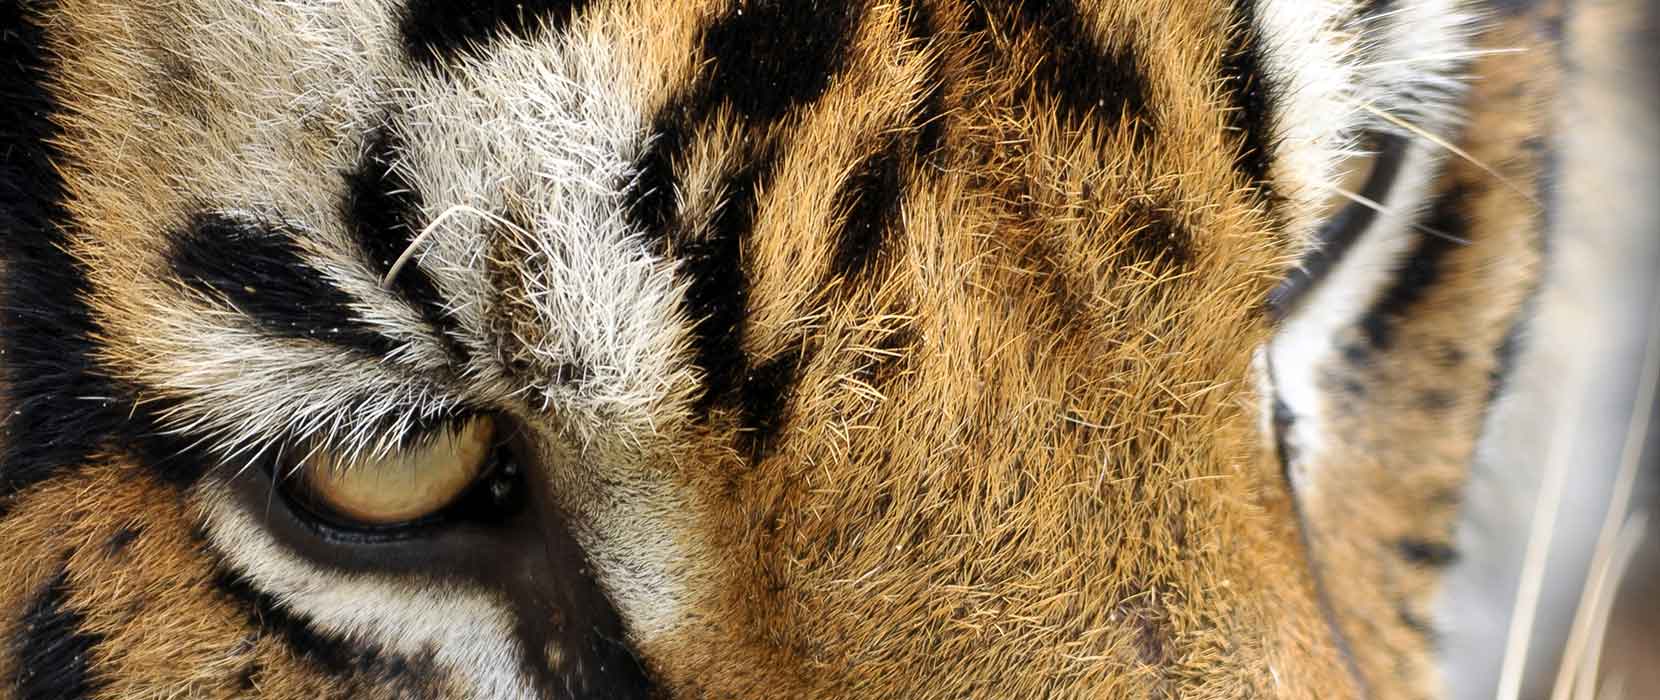 Close up of a tiger's face, showing one eye.